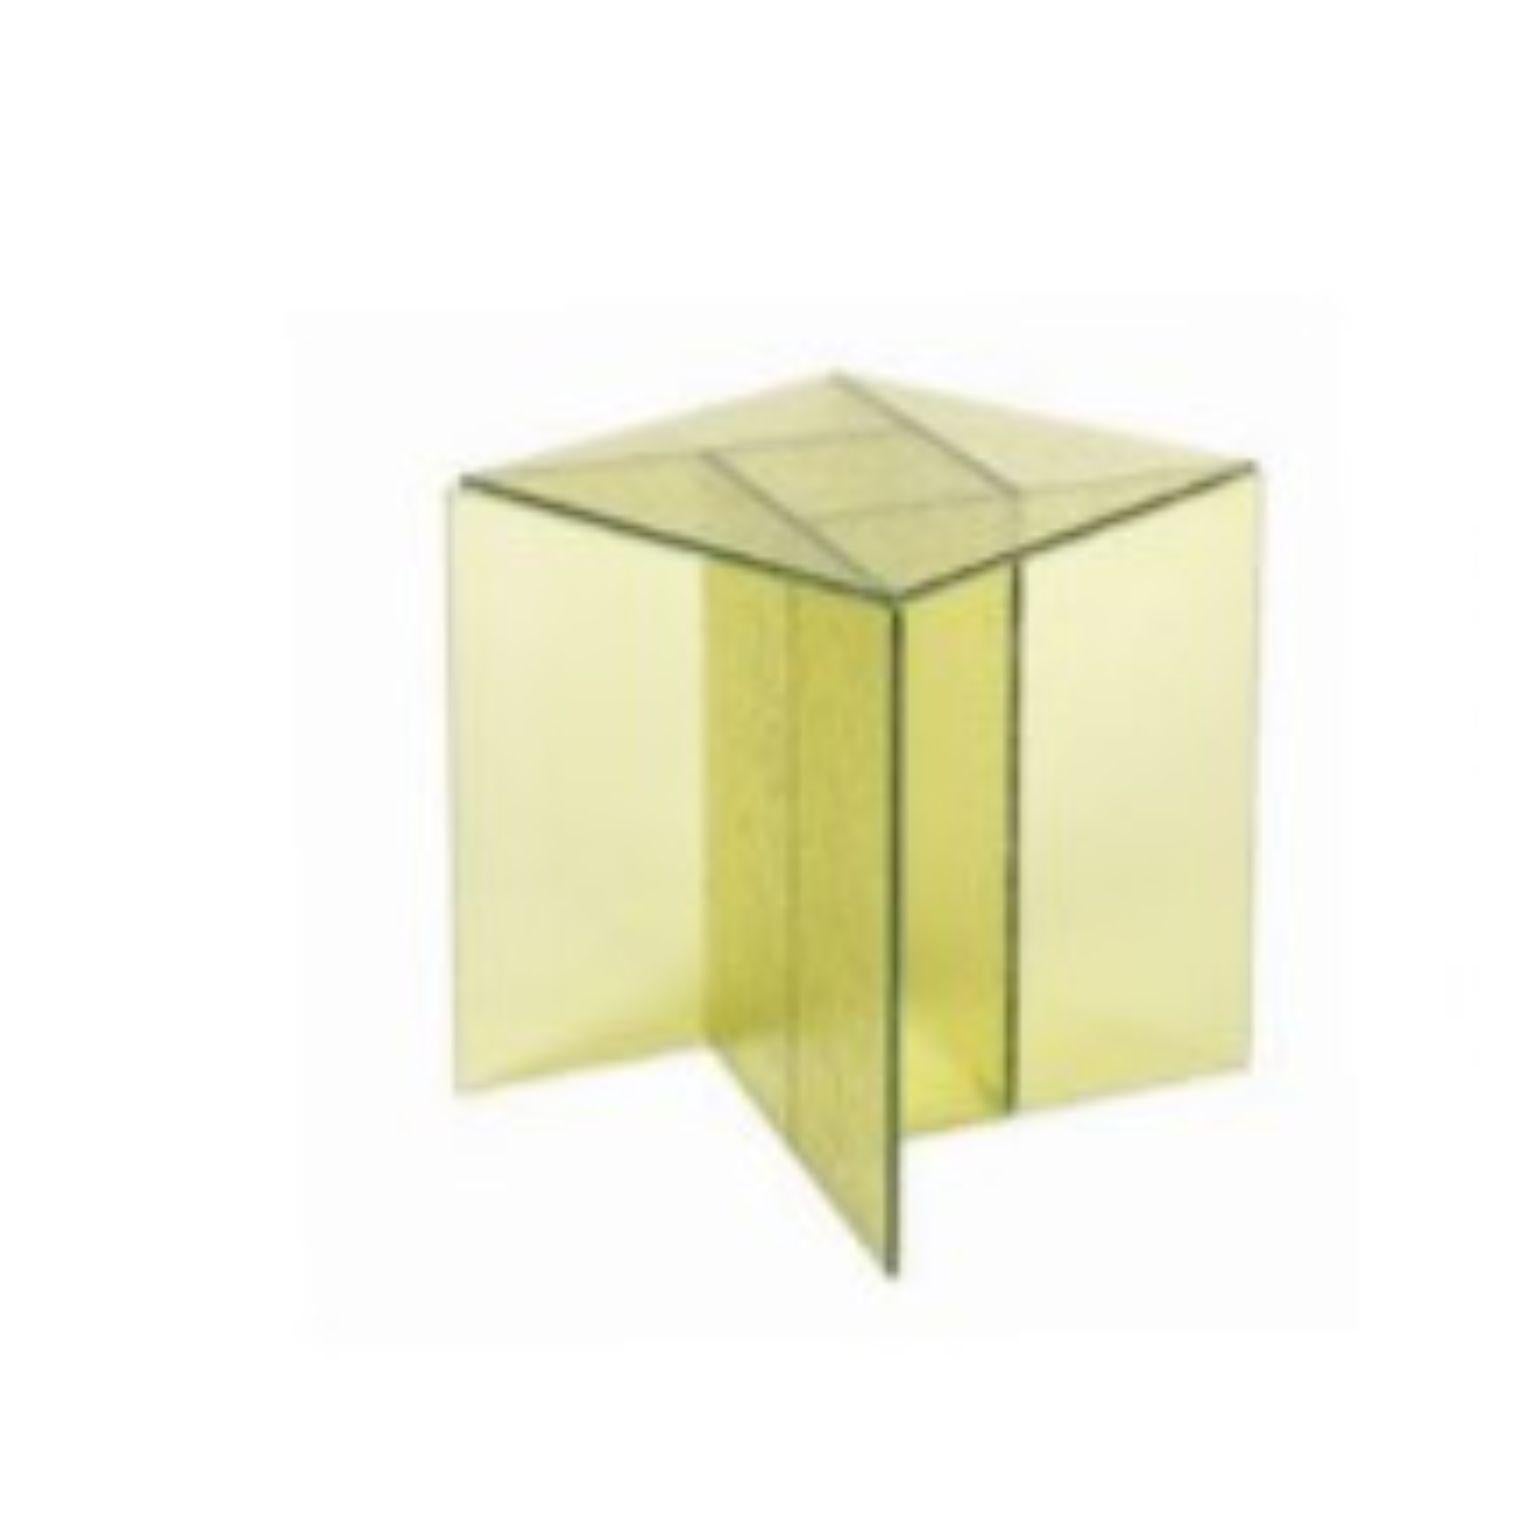 Aspa small side table by Pulpo
Dimensions: D40 x W40 x H50 cm
Materials: glass

Also available in different colors. 

Variety is a pleasure. Aspa, the side table concept from the Spanish design studio MUT, is a simple study in geometry. Five